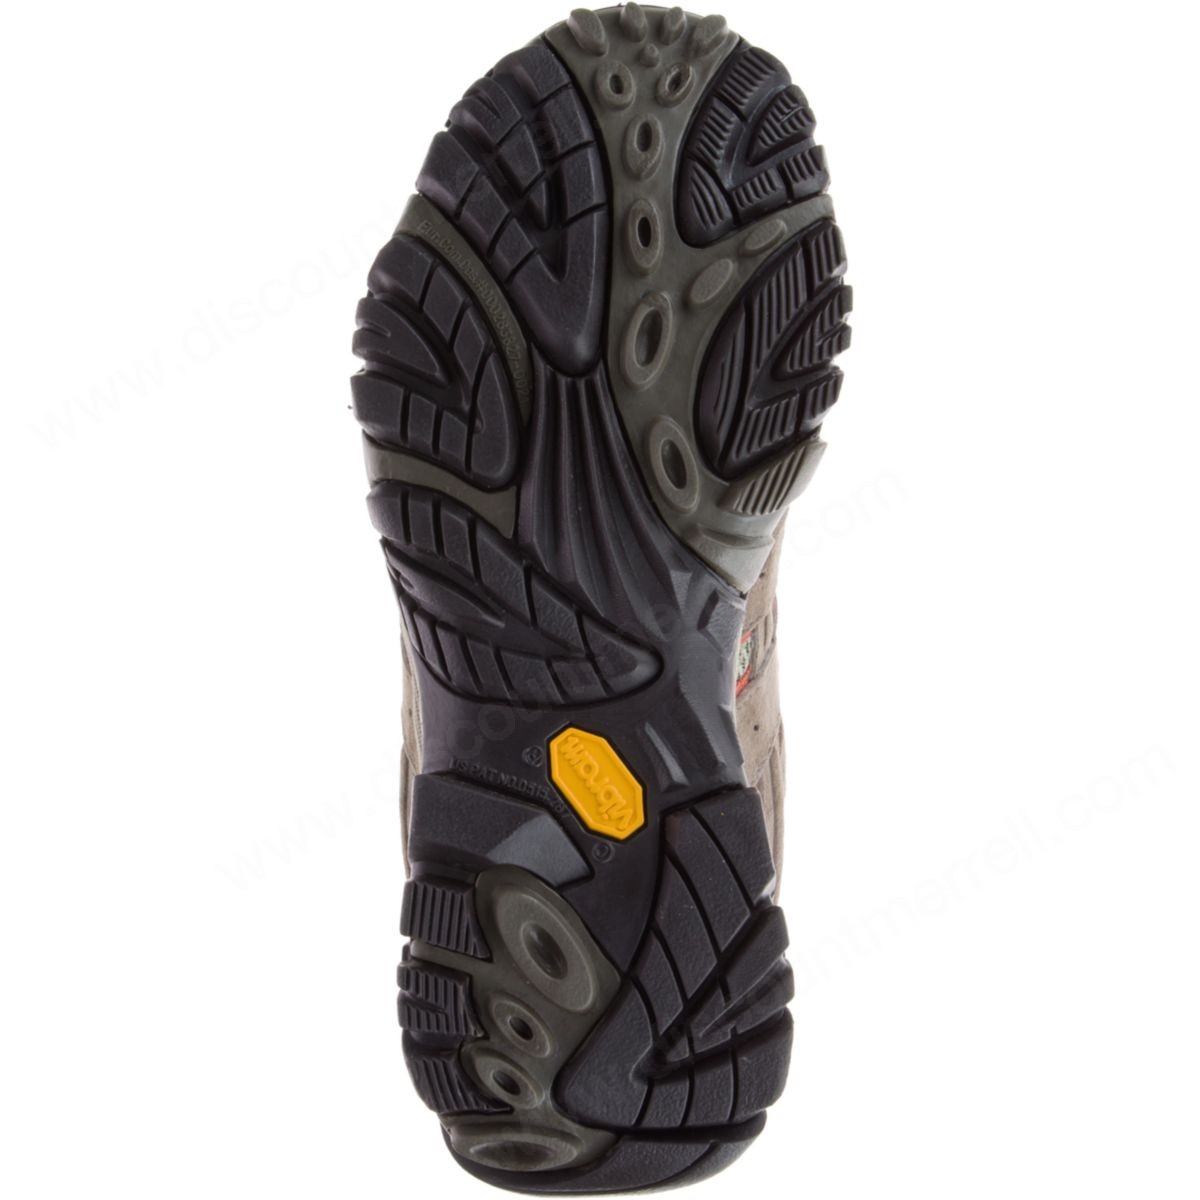 Merrell Lady's Moab Mother Of All Boots™ Mid Waterproof Wide Width Bungee Cord - -1